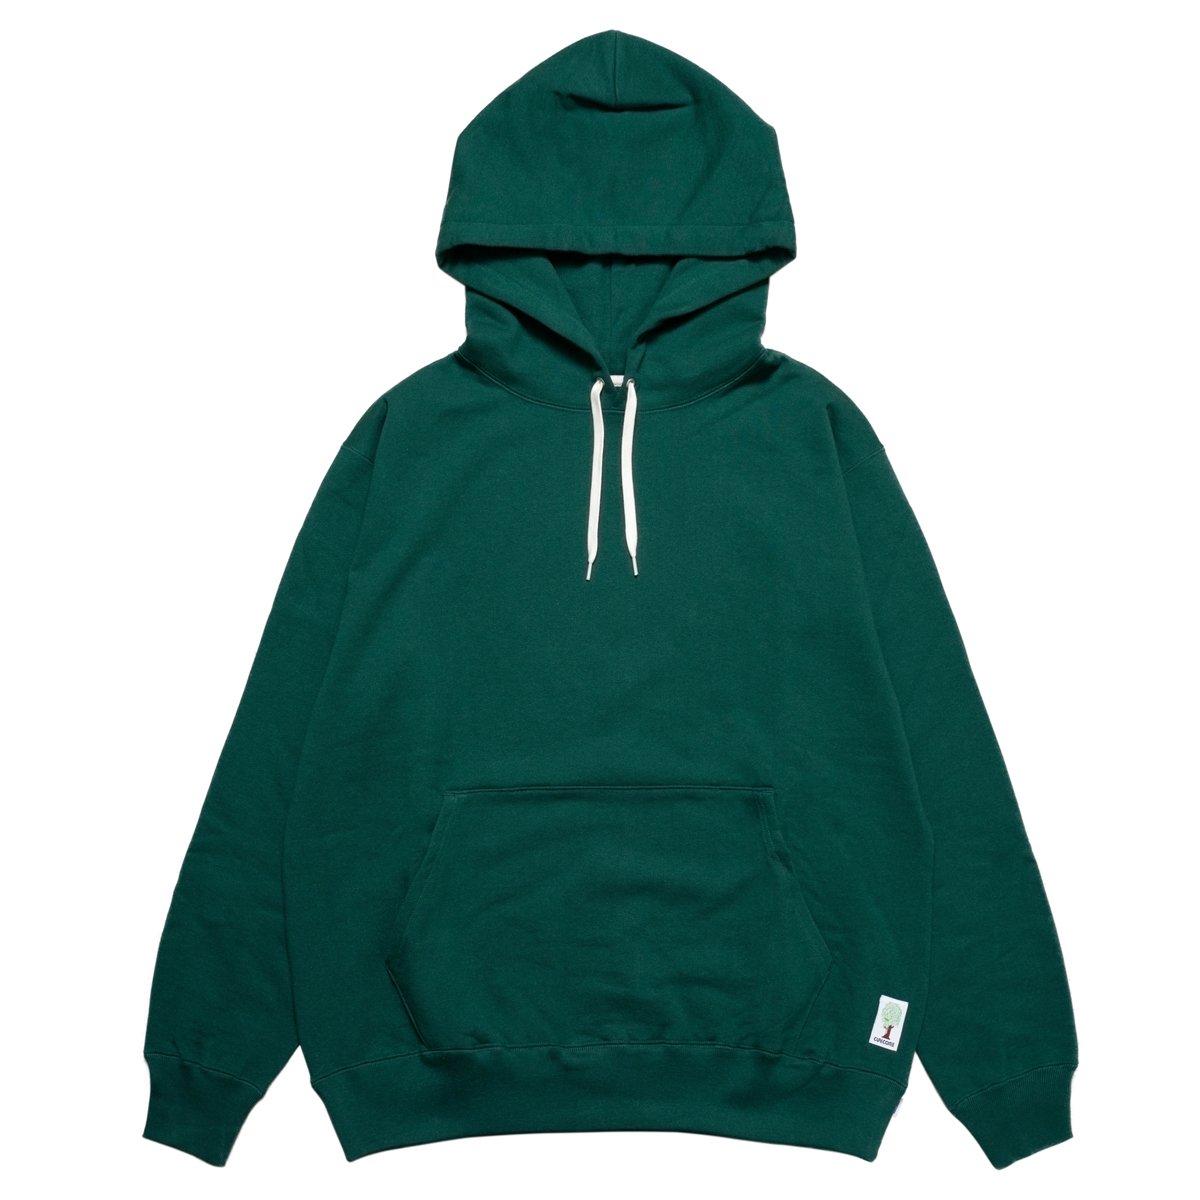 Forward Weave Hoodie - Green - CUP AND CONE